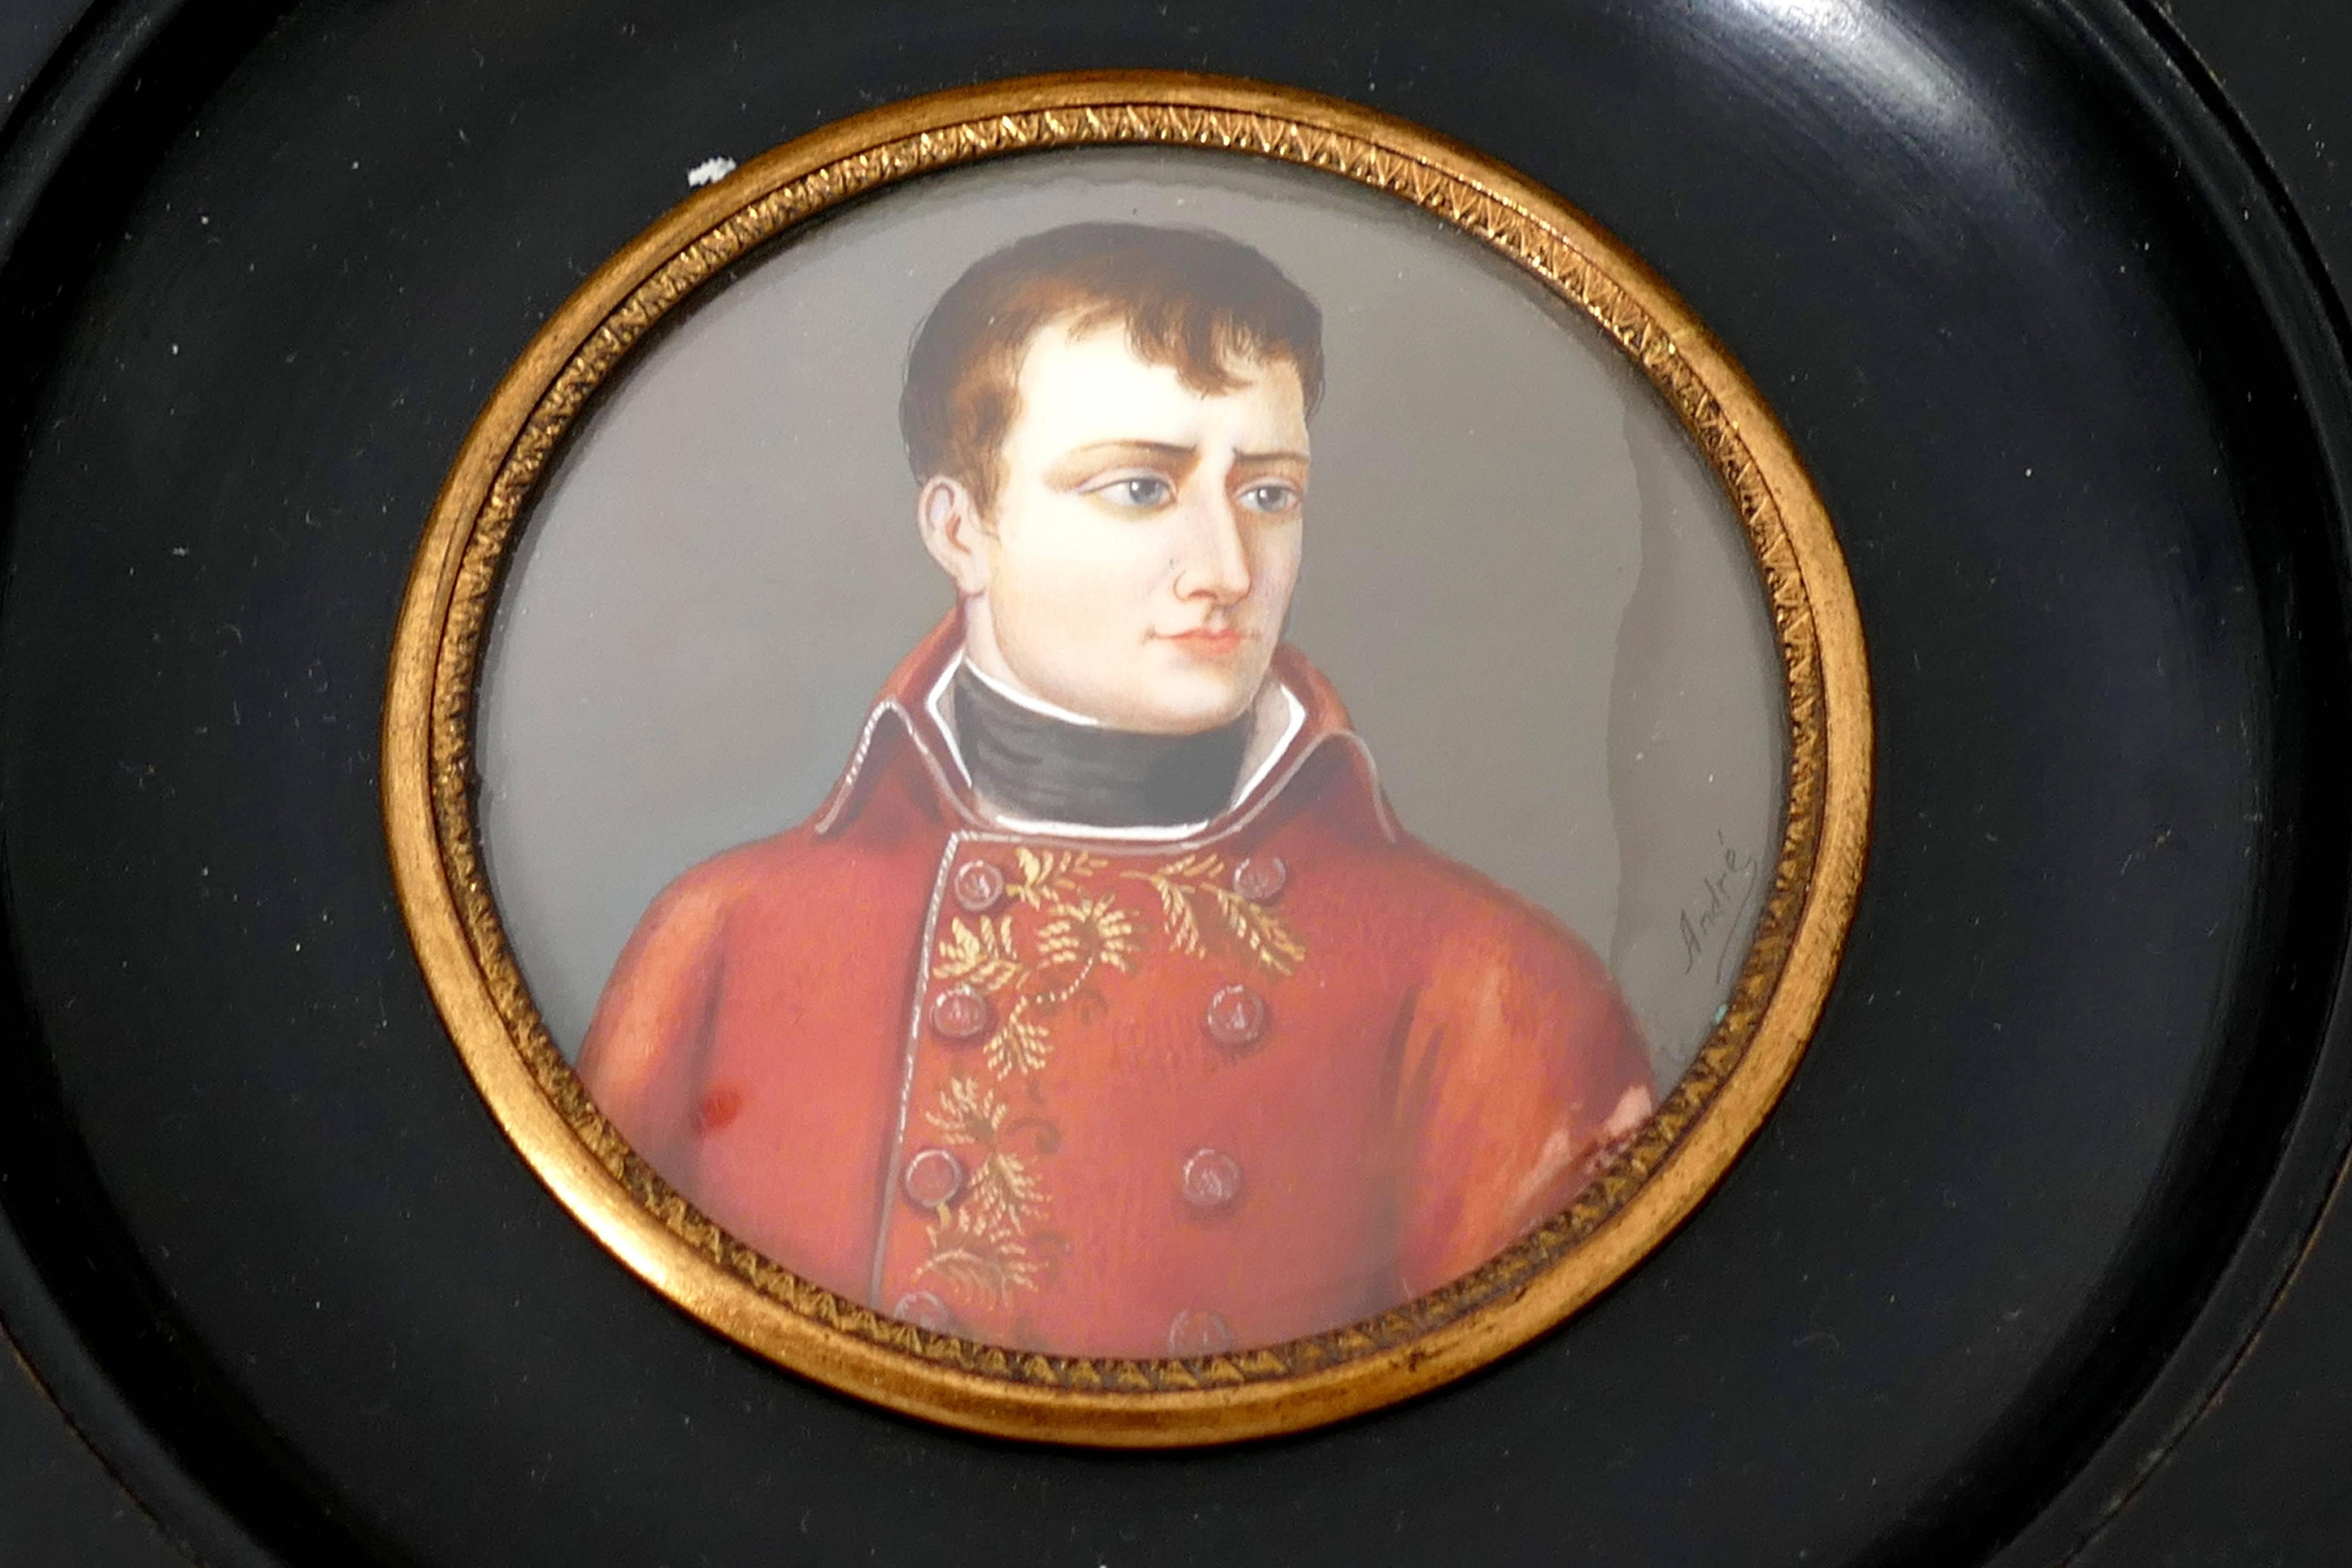 Antique French miniature paintings signed, Portraits Napoleon and Josephine

Antique 19th century French miniature portrait pair hand-painting of Napoleon Bonaparte, Emperor of French, in red costume of consul of the republic and his wife